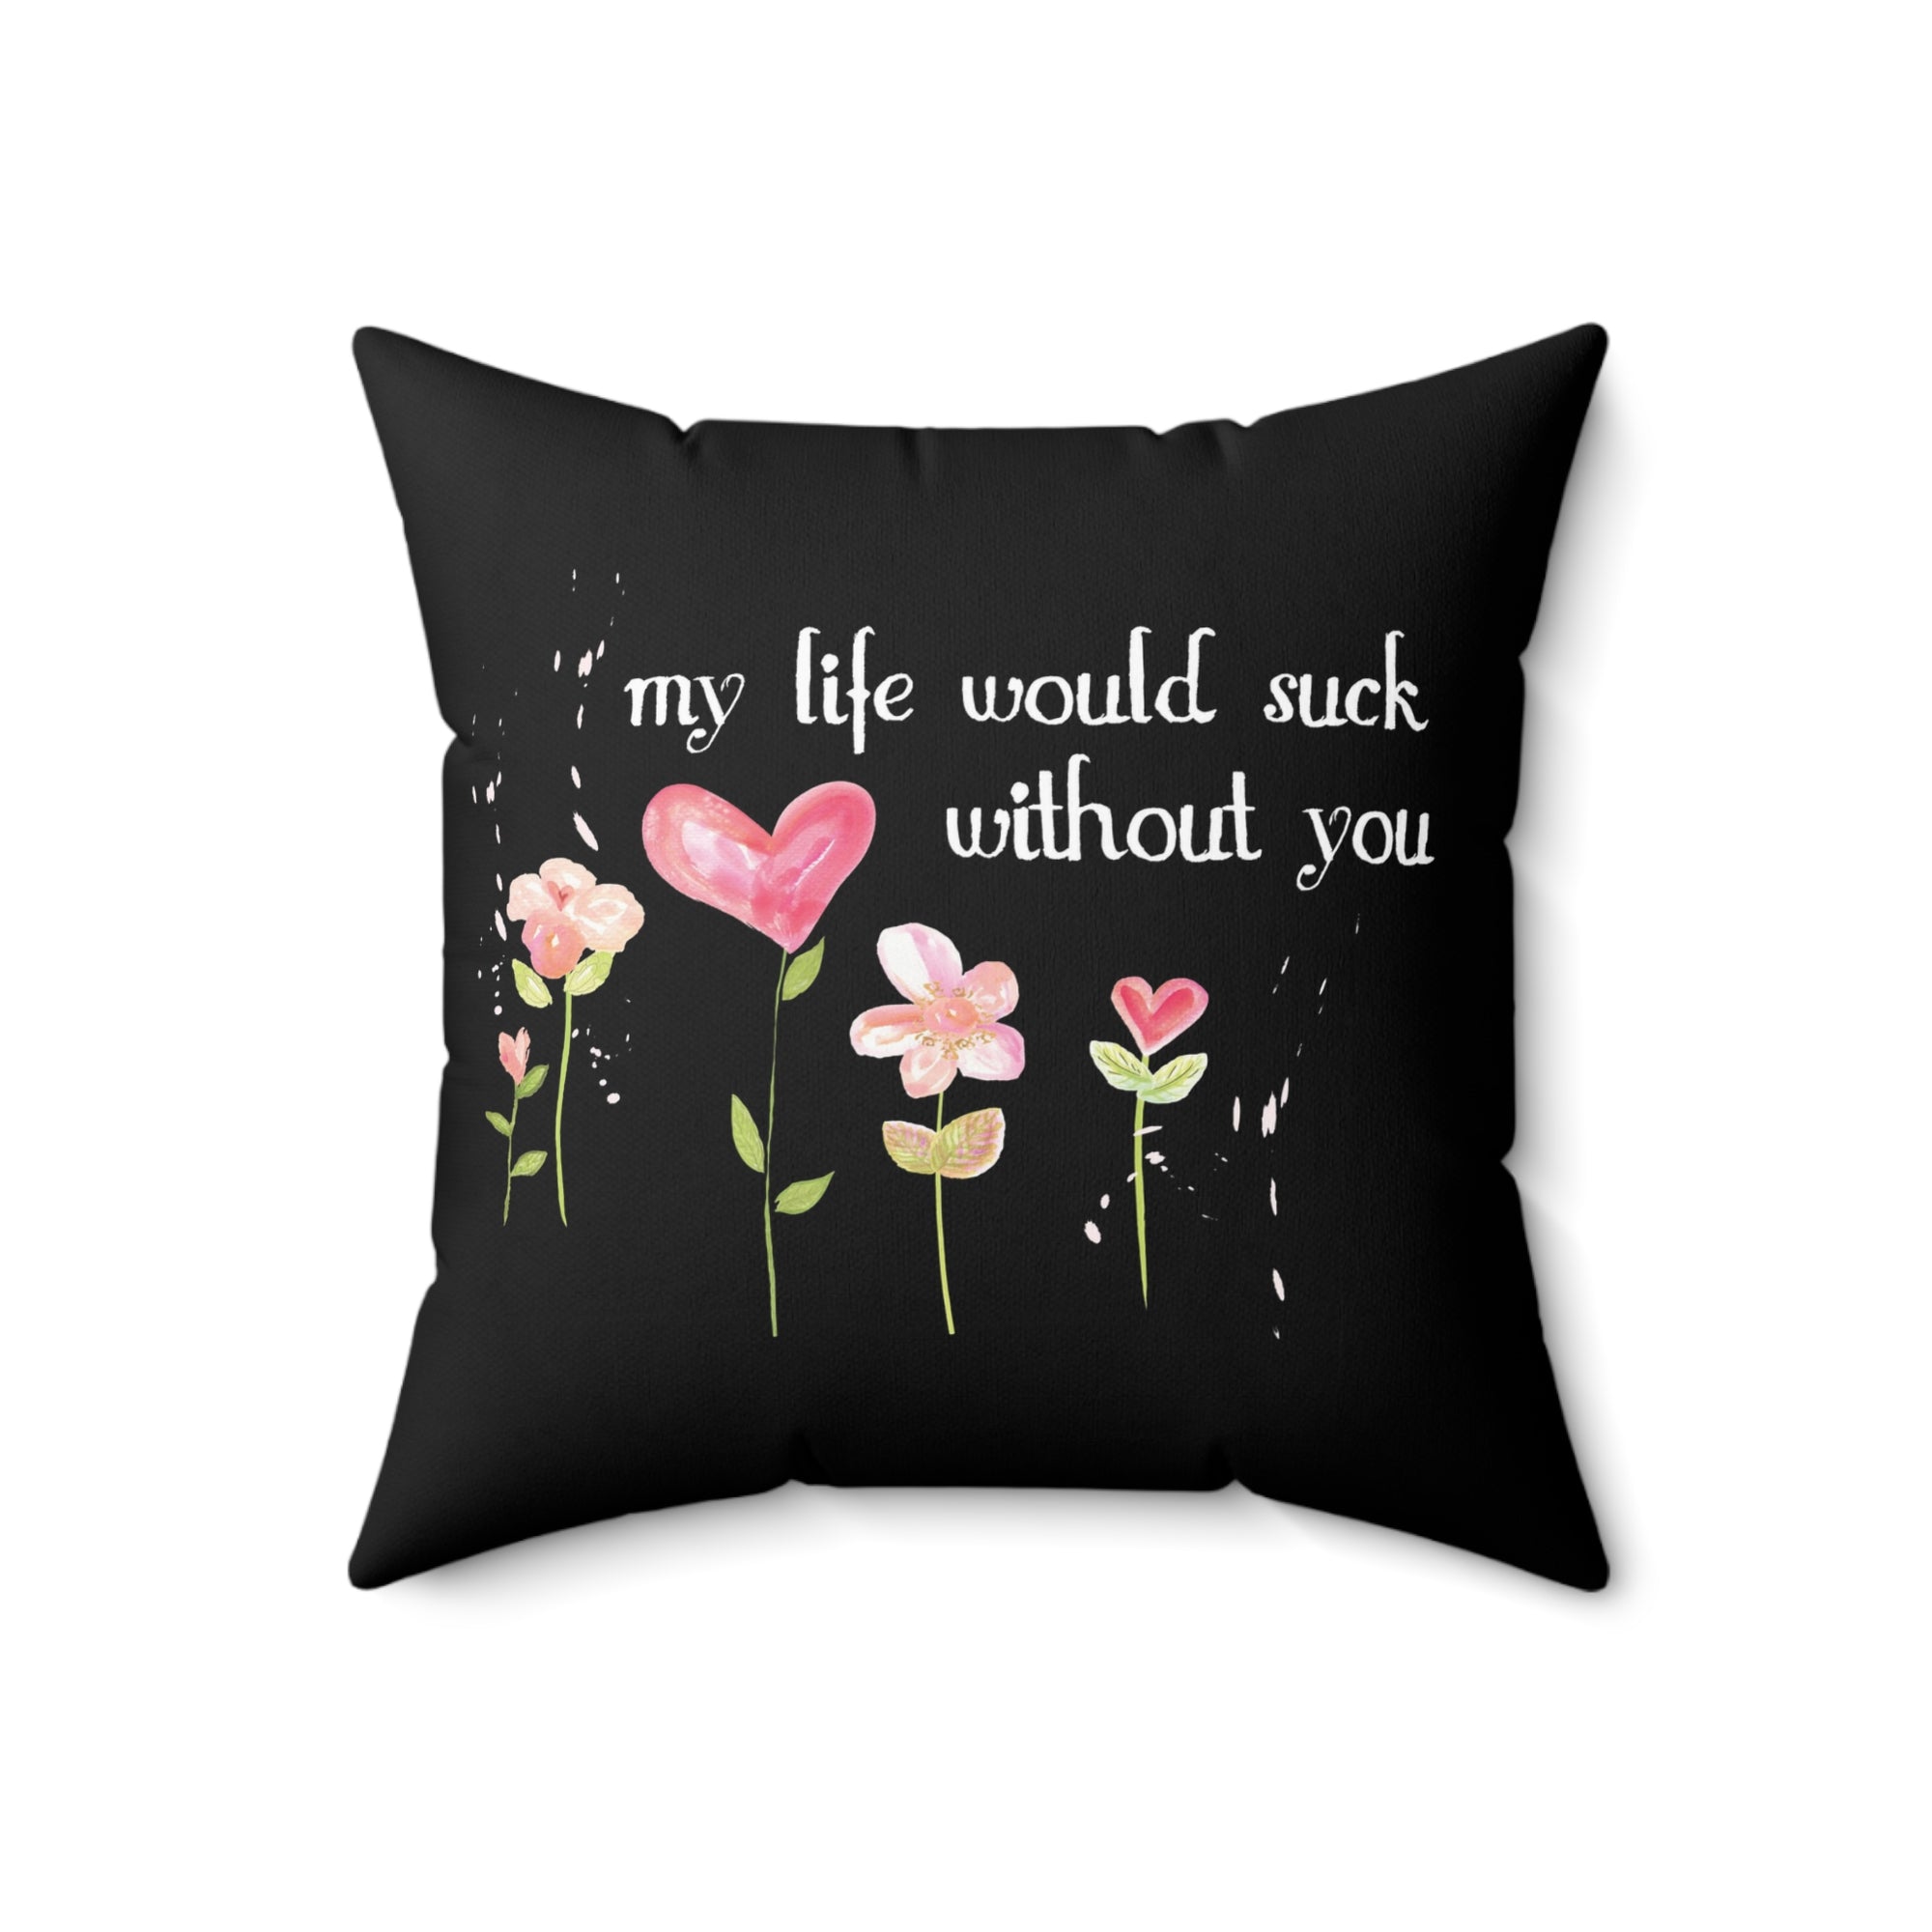 Funny Valentine Pillow | Funny Love Pillow | Pillow for Valentine | Black and Pink Heart Pillow